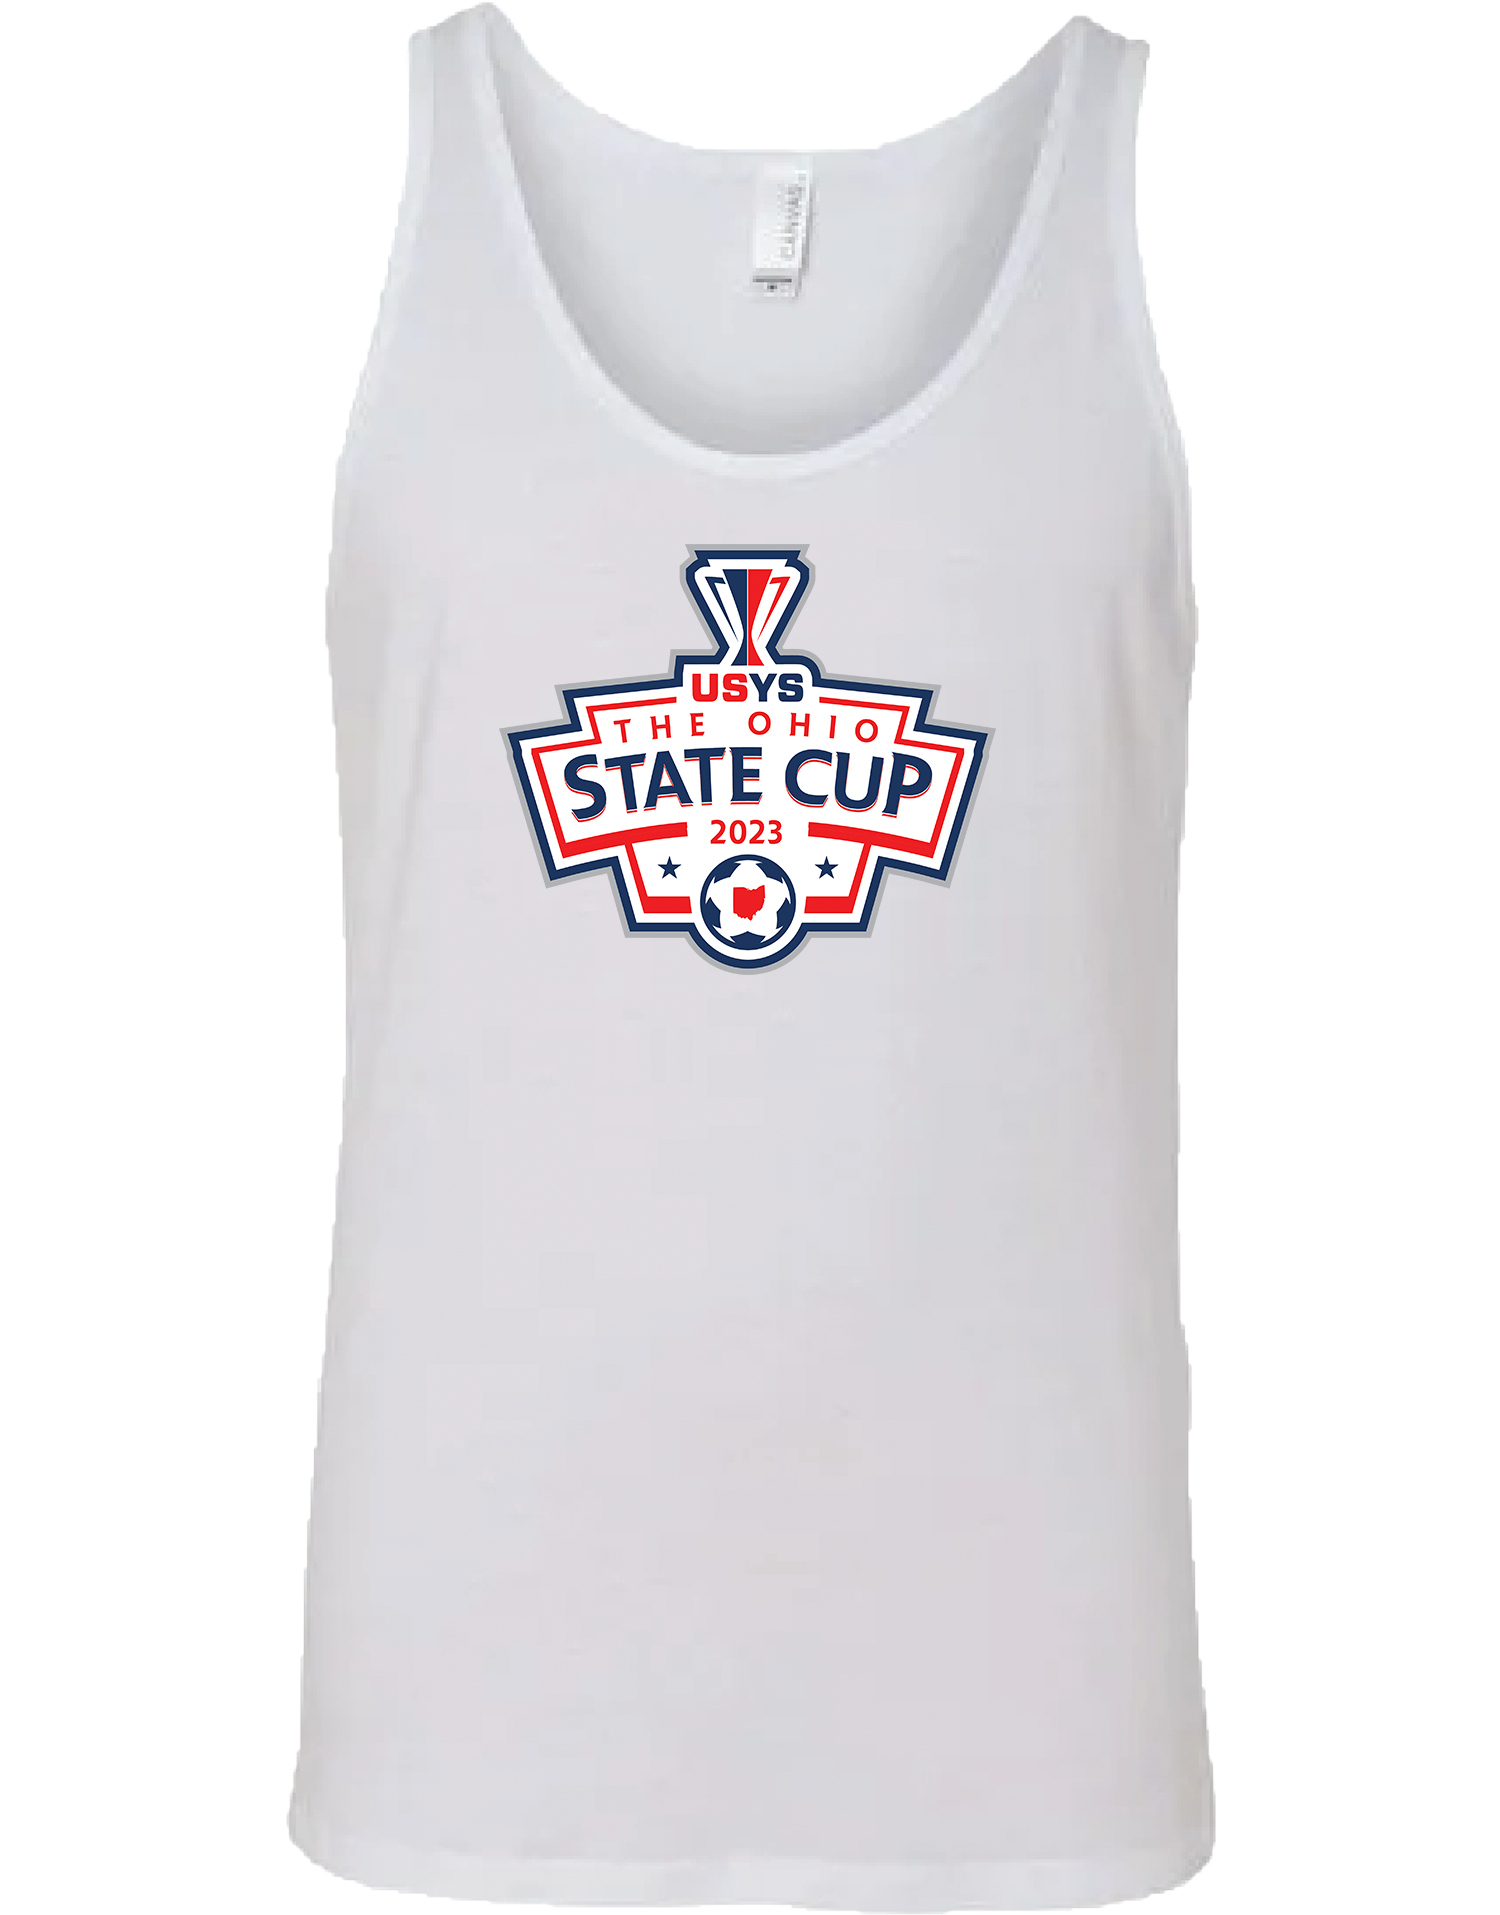 TANK TOP - 2023 USYS The Ohio State Cup